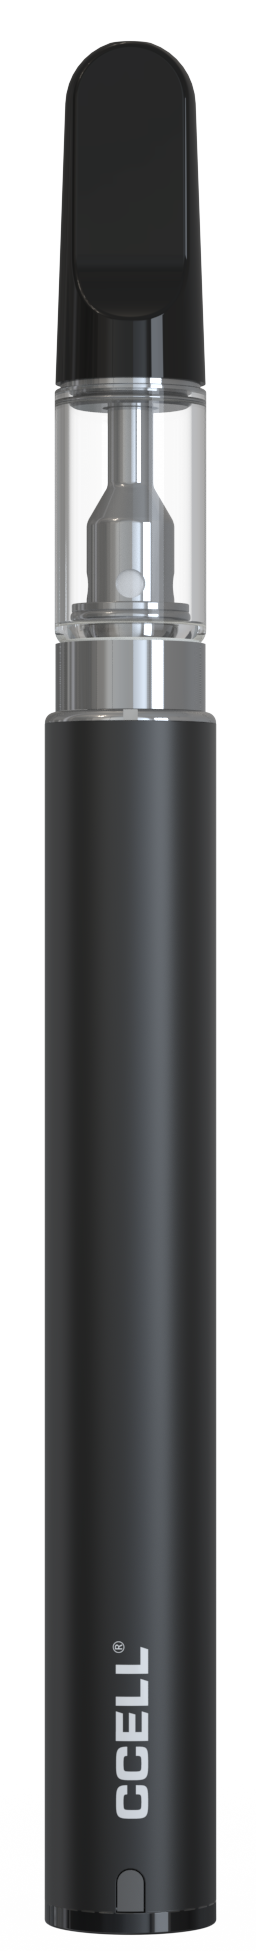 A CCELL M3 plus vape battery